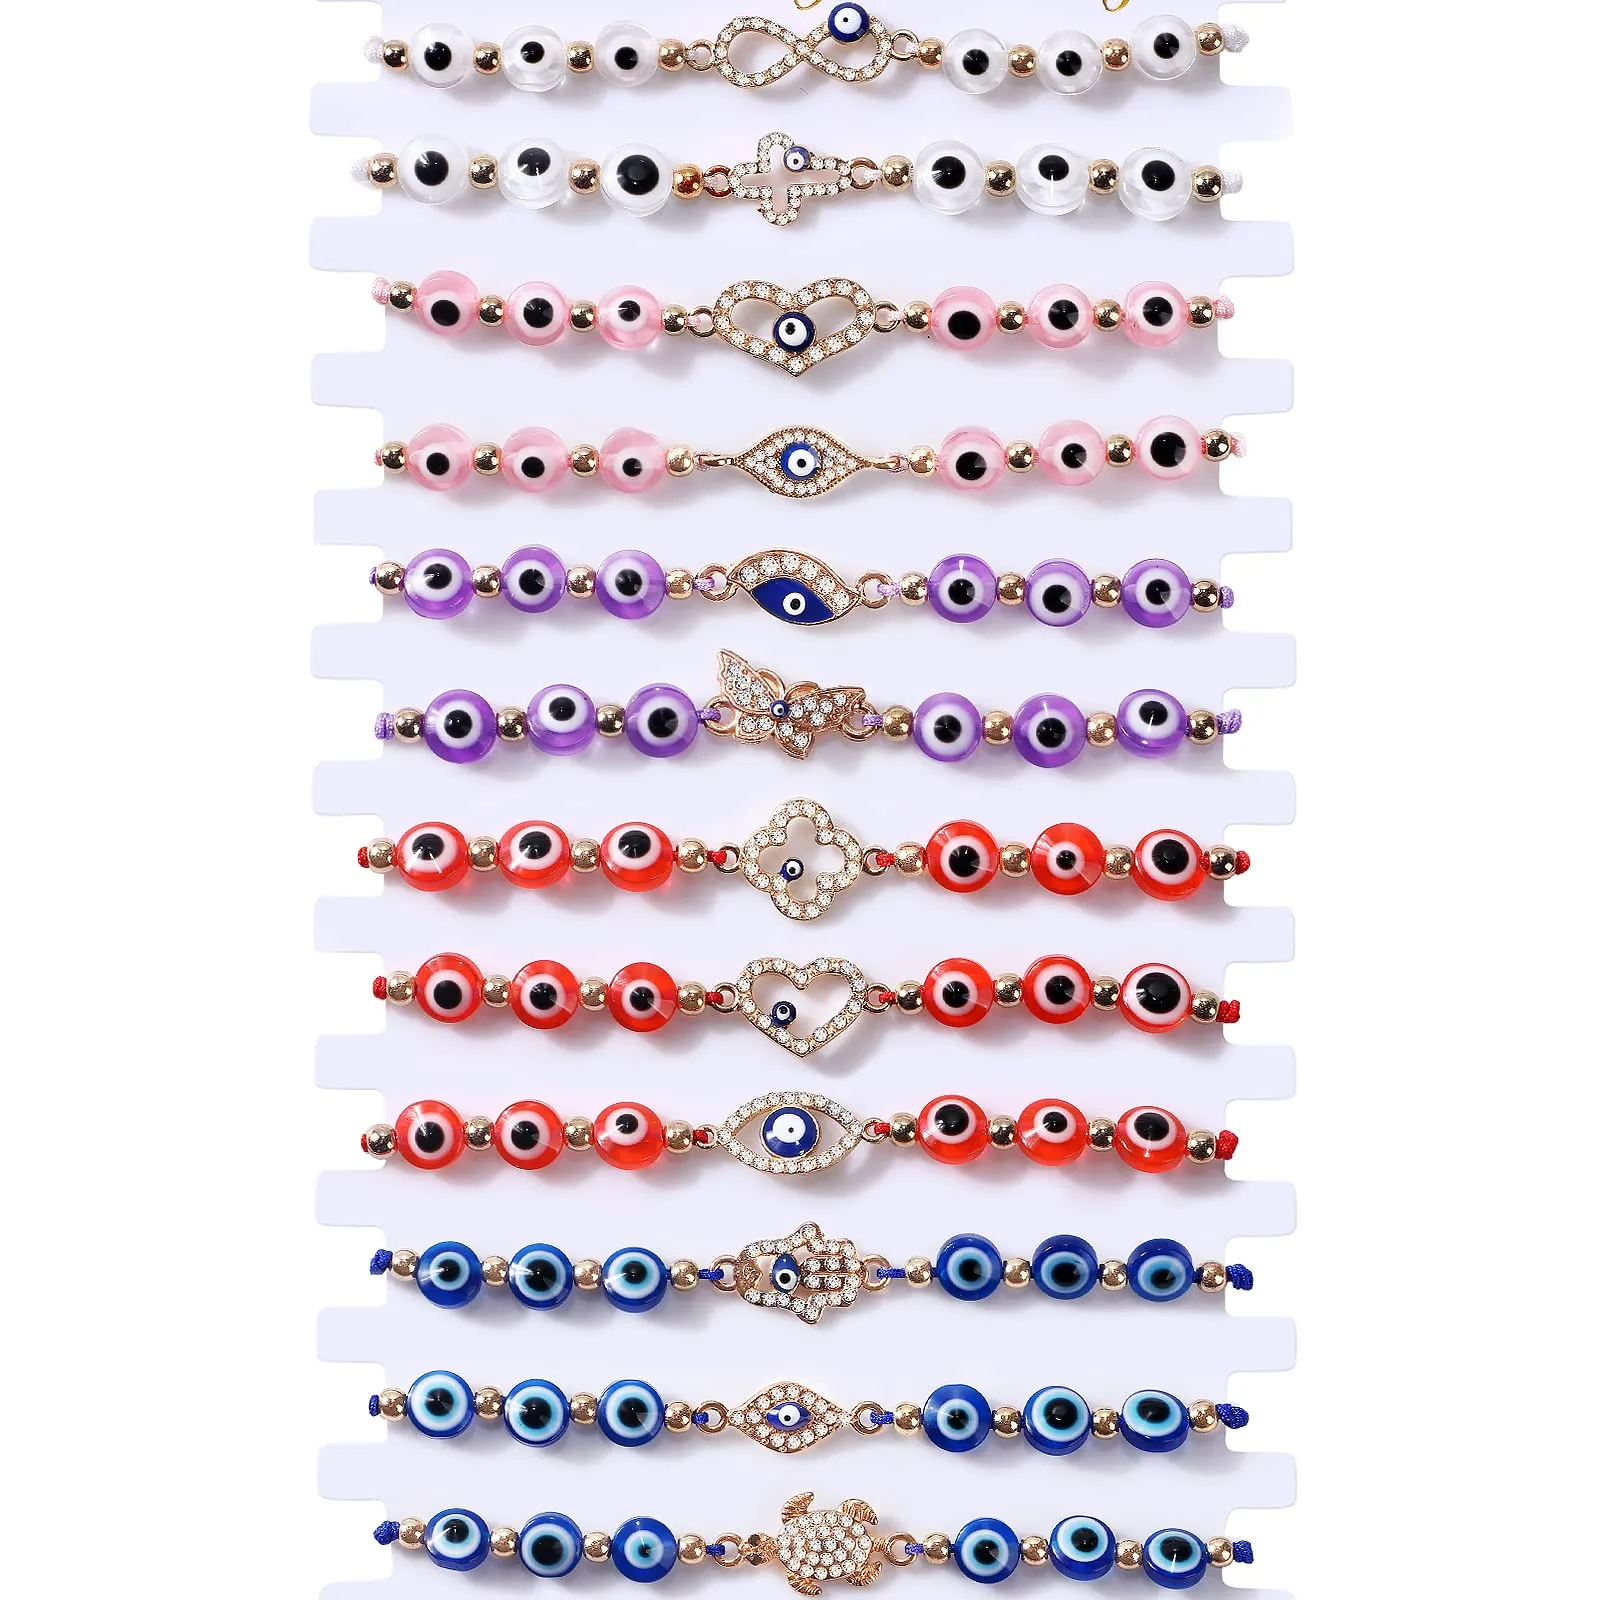 Handmade Mexican Crystal Chain Evil Eye Bracelets Pack For Women, Girls,  And Boys Adjustable With Blue, Red, Or Black String Knot Beads Drop  Delivery Available From Yummy_jewelry, $0.39